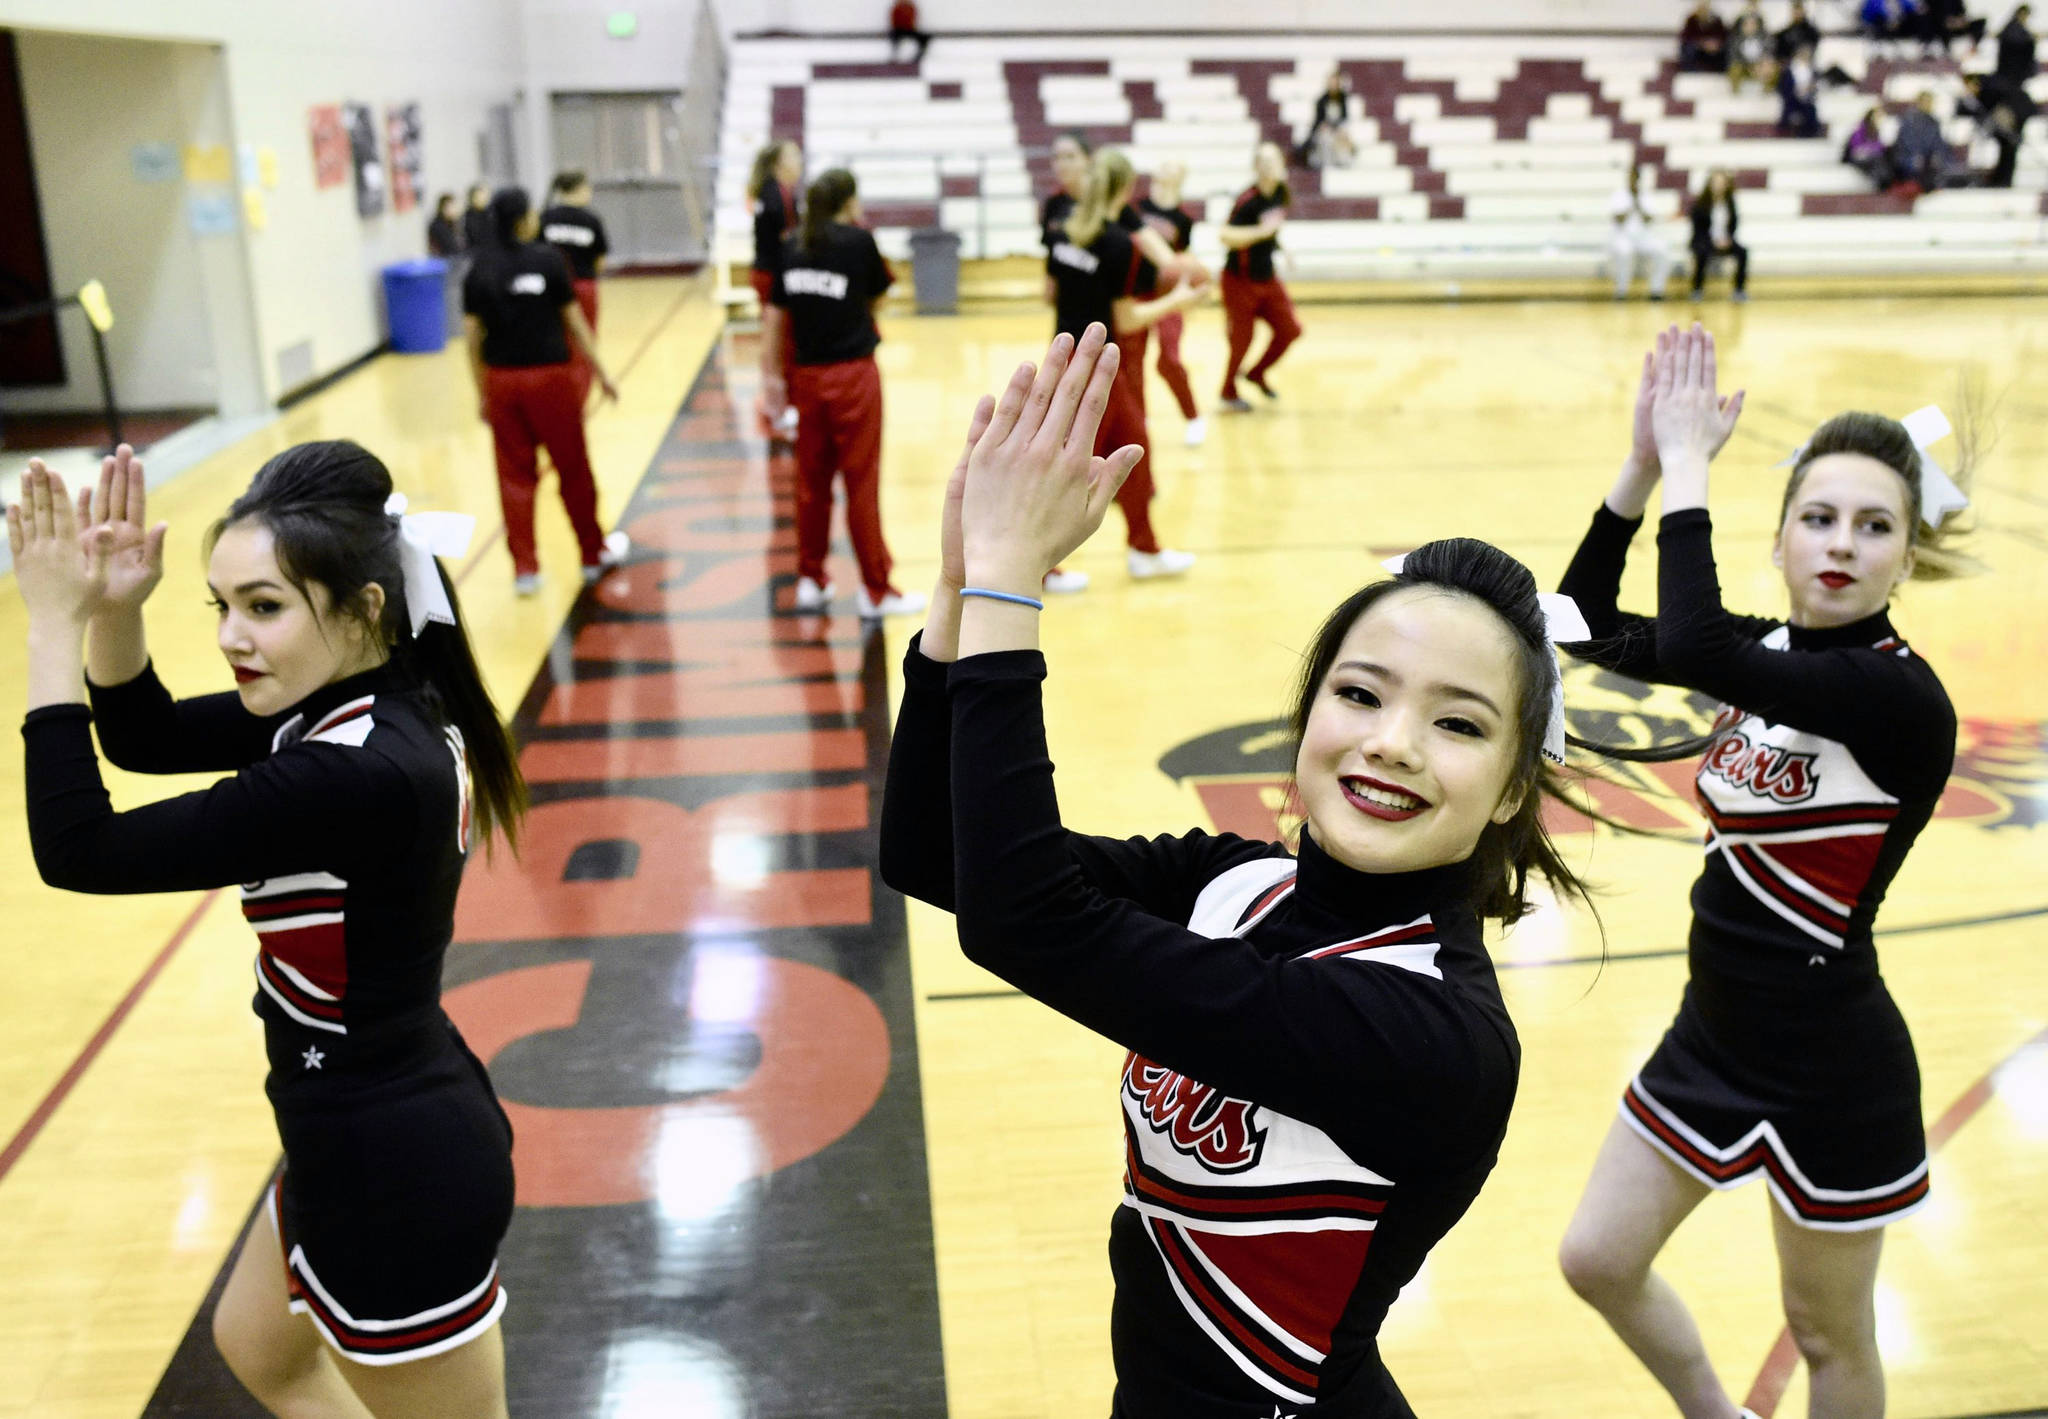 Juneau-Douglas High School cheerleaders and girls basketball team warm up for their opening game at the Capital City Classic at JDHS on Wednesday, Dec. 27, 2017. (Michael Penn | Juneau Empire)  Juneau-Douglas High School cheerleaders and girls basketball team warm up for their opening game at the Capital City Classic at JDHS on Wednesday, Dec. 27, 2017.